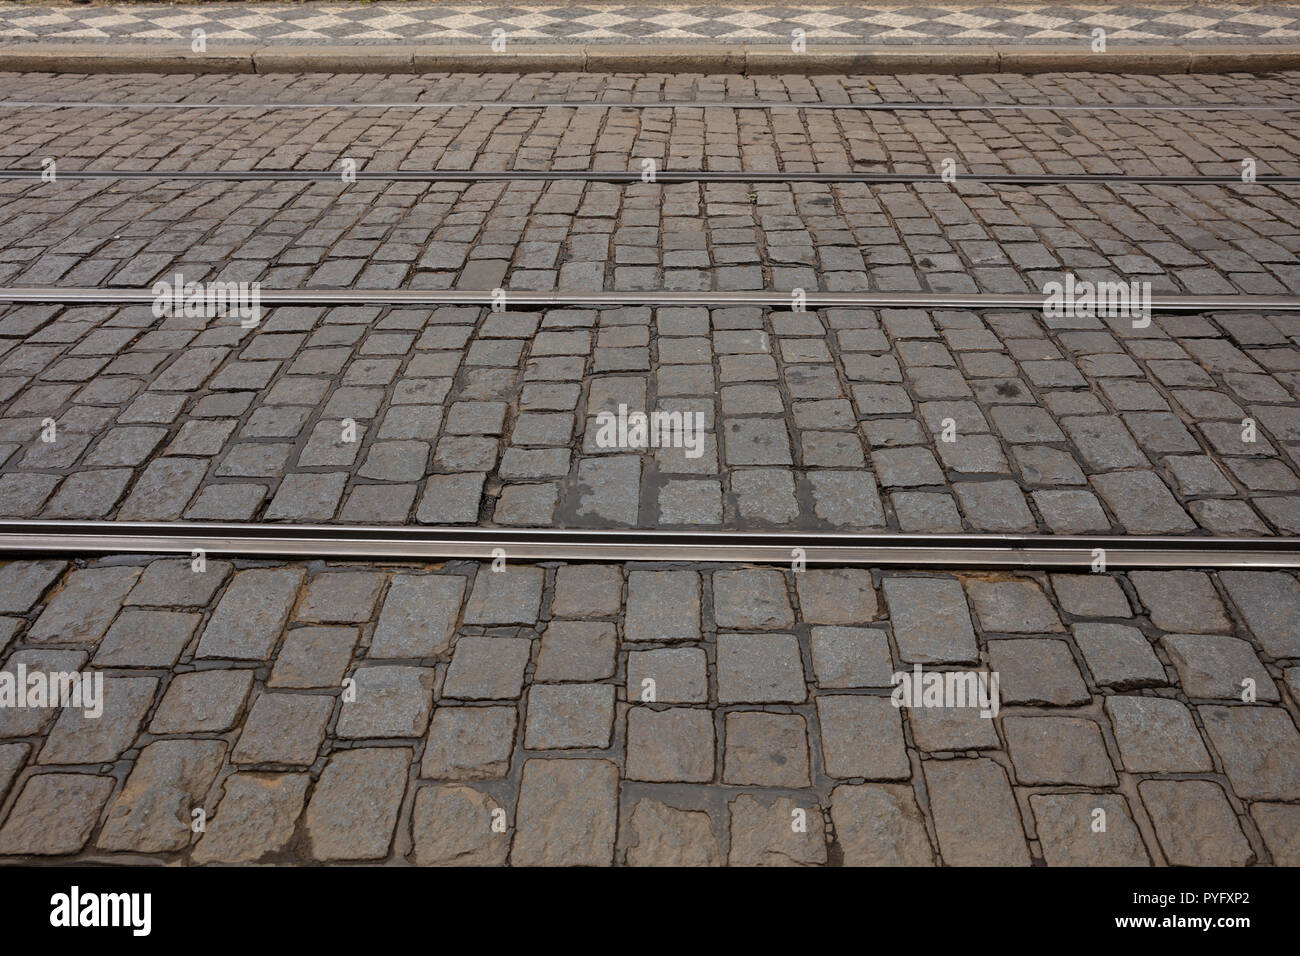 Top view of cobblestone street, texture, background. Stock Photo